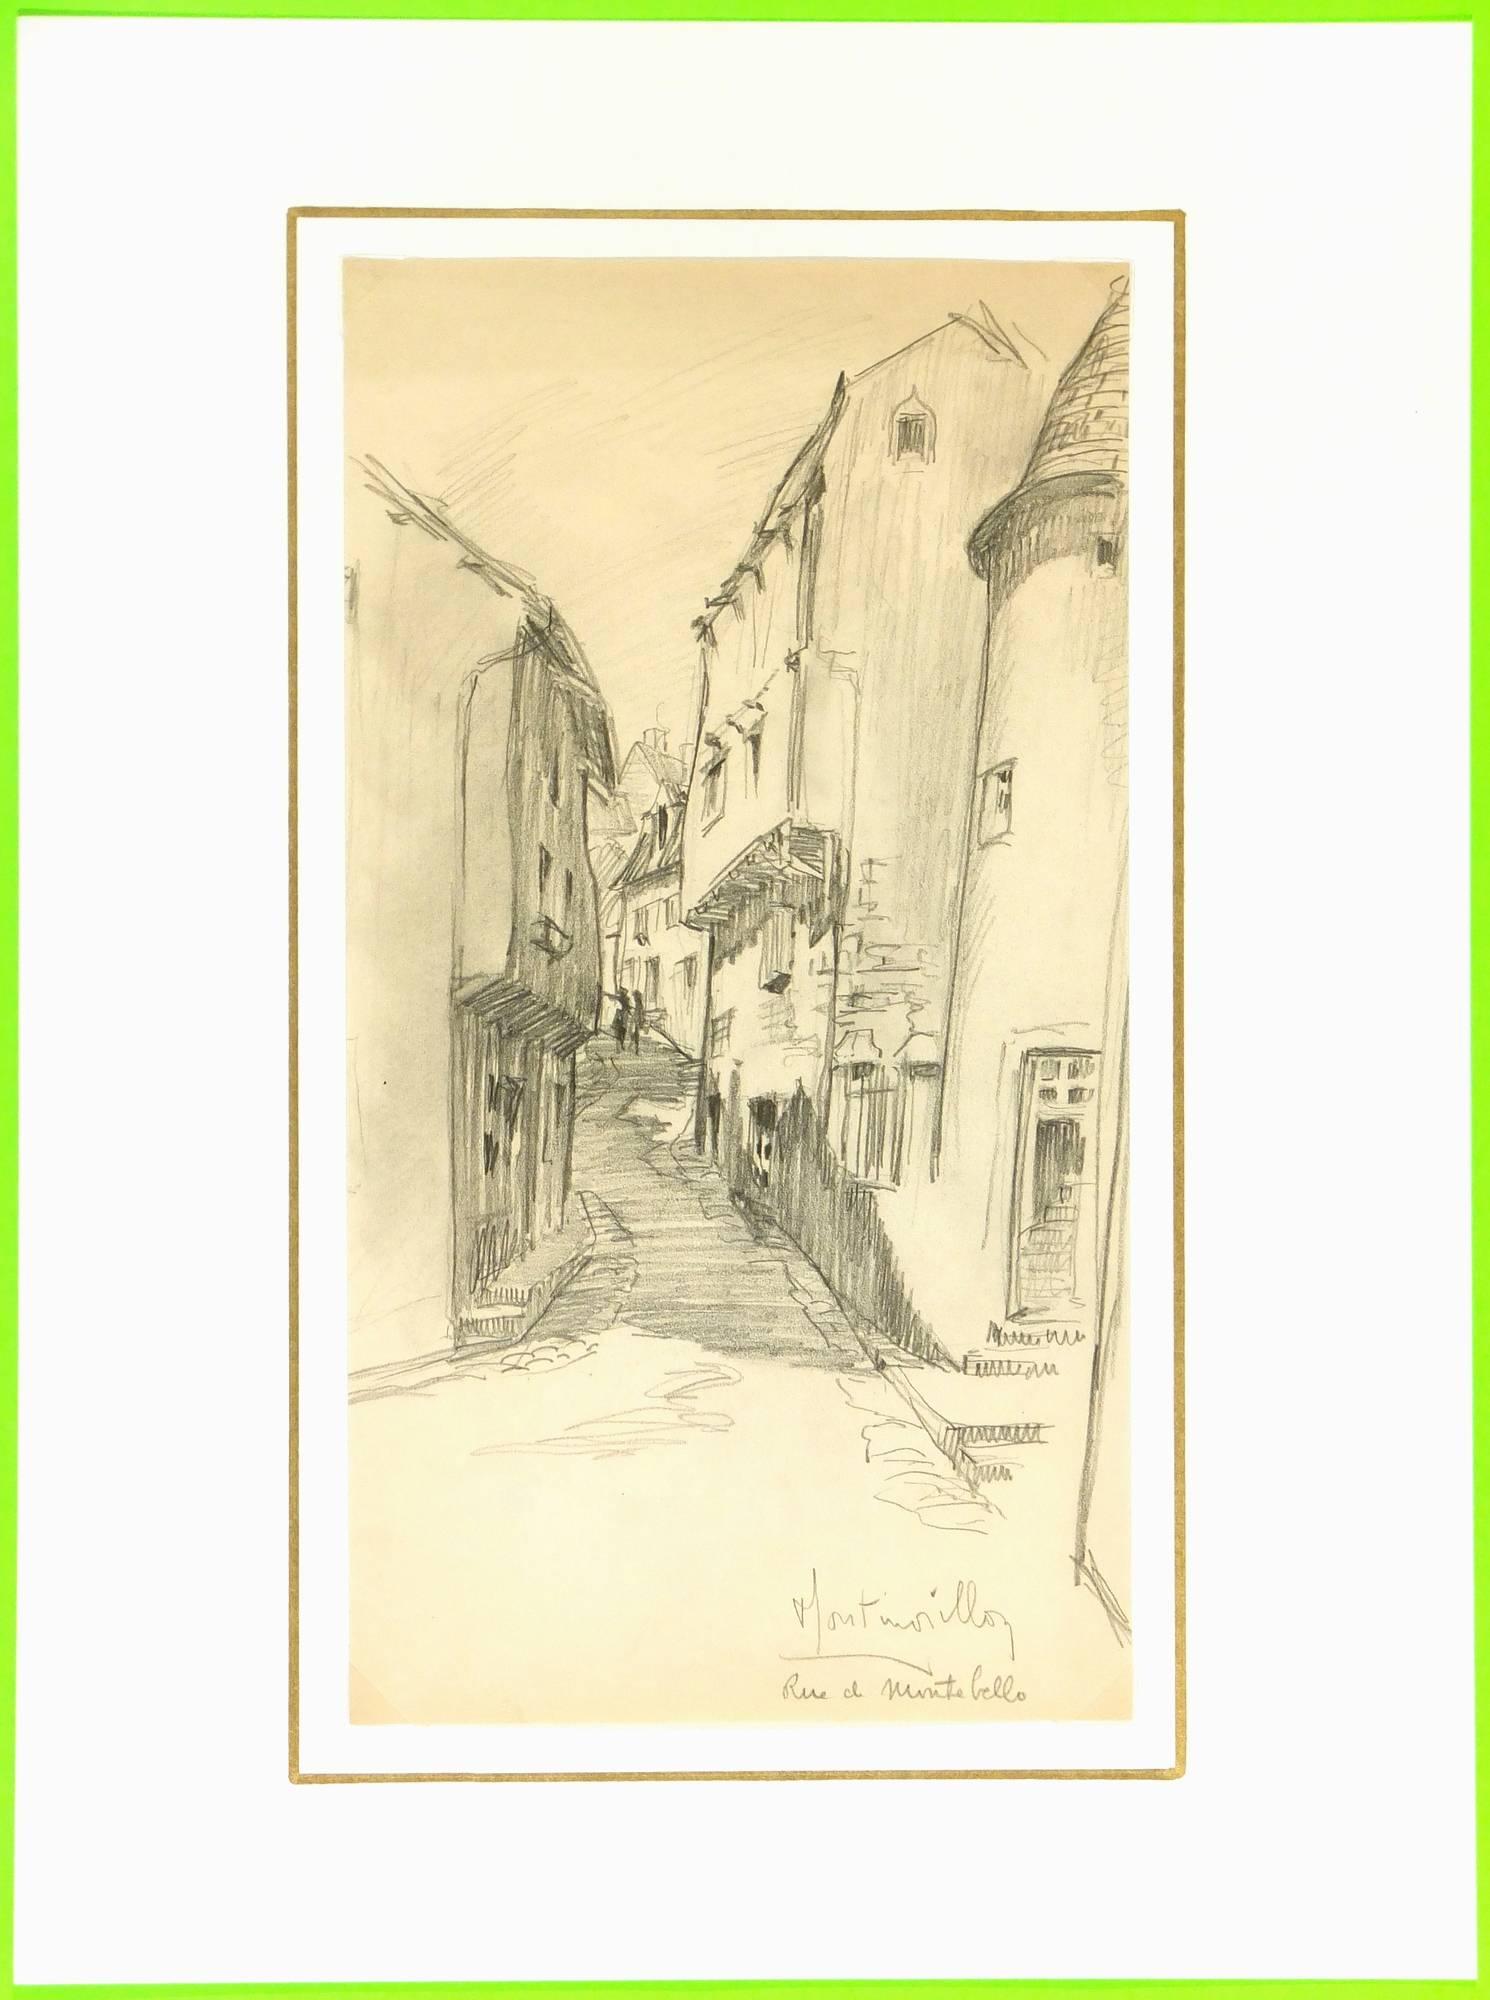 Pencil drawing of street scene in the old town of Montmorillon in Nouvelle-Aquitaine France, 1943.  Title lower right. Rue Montebello is the oldest streets of the historic center. 

Original artwork on paper displayed on a white mat with a gold